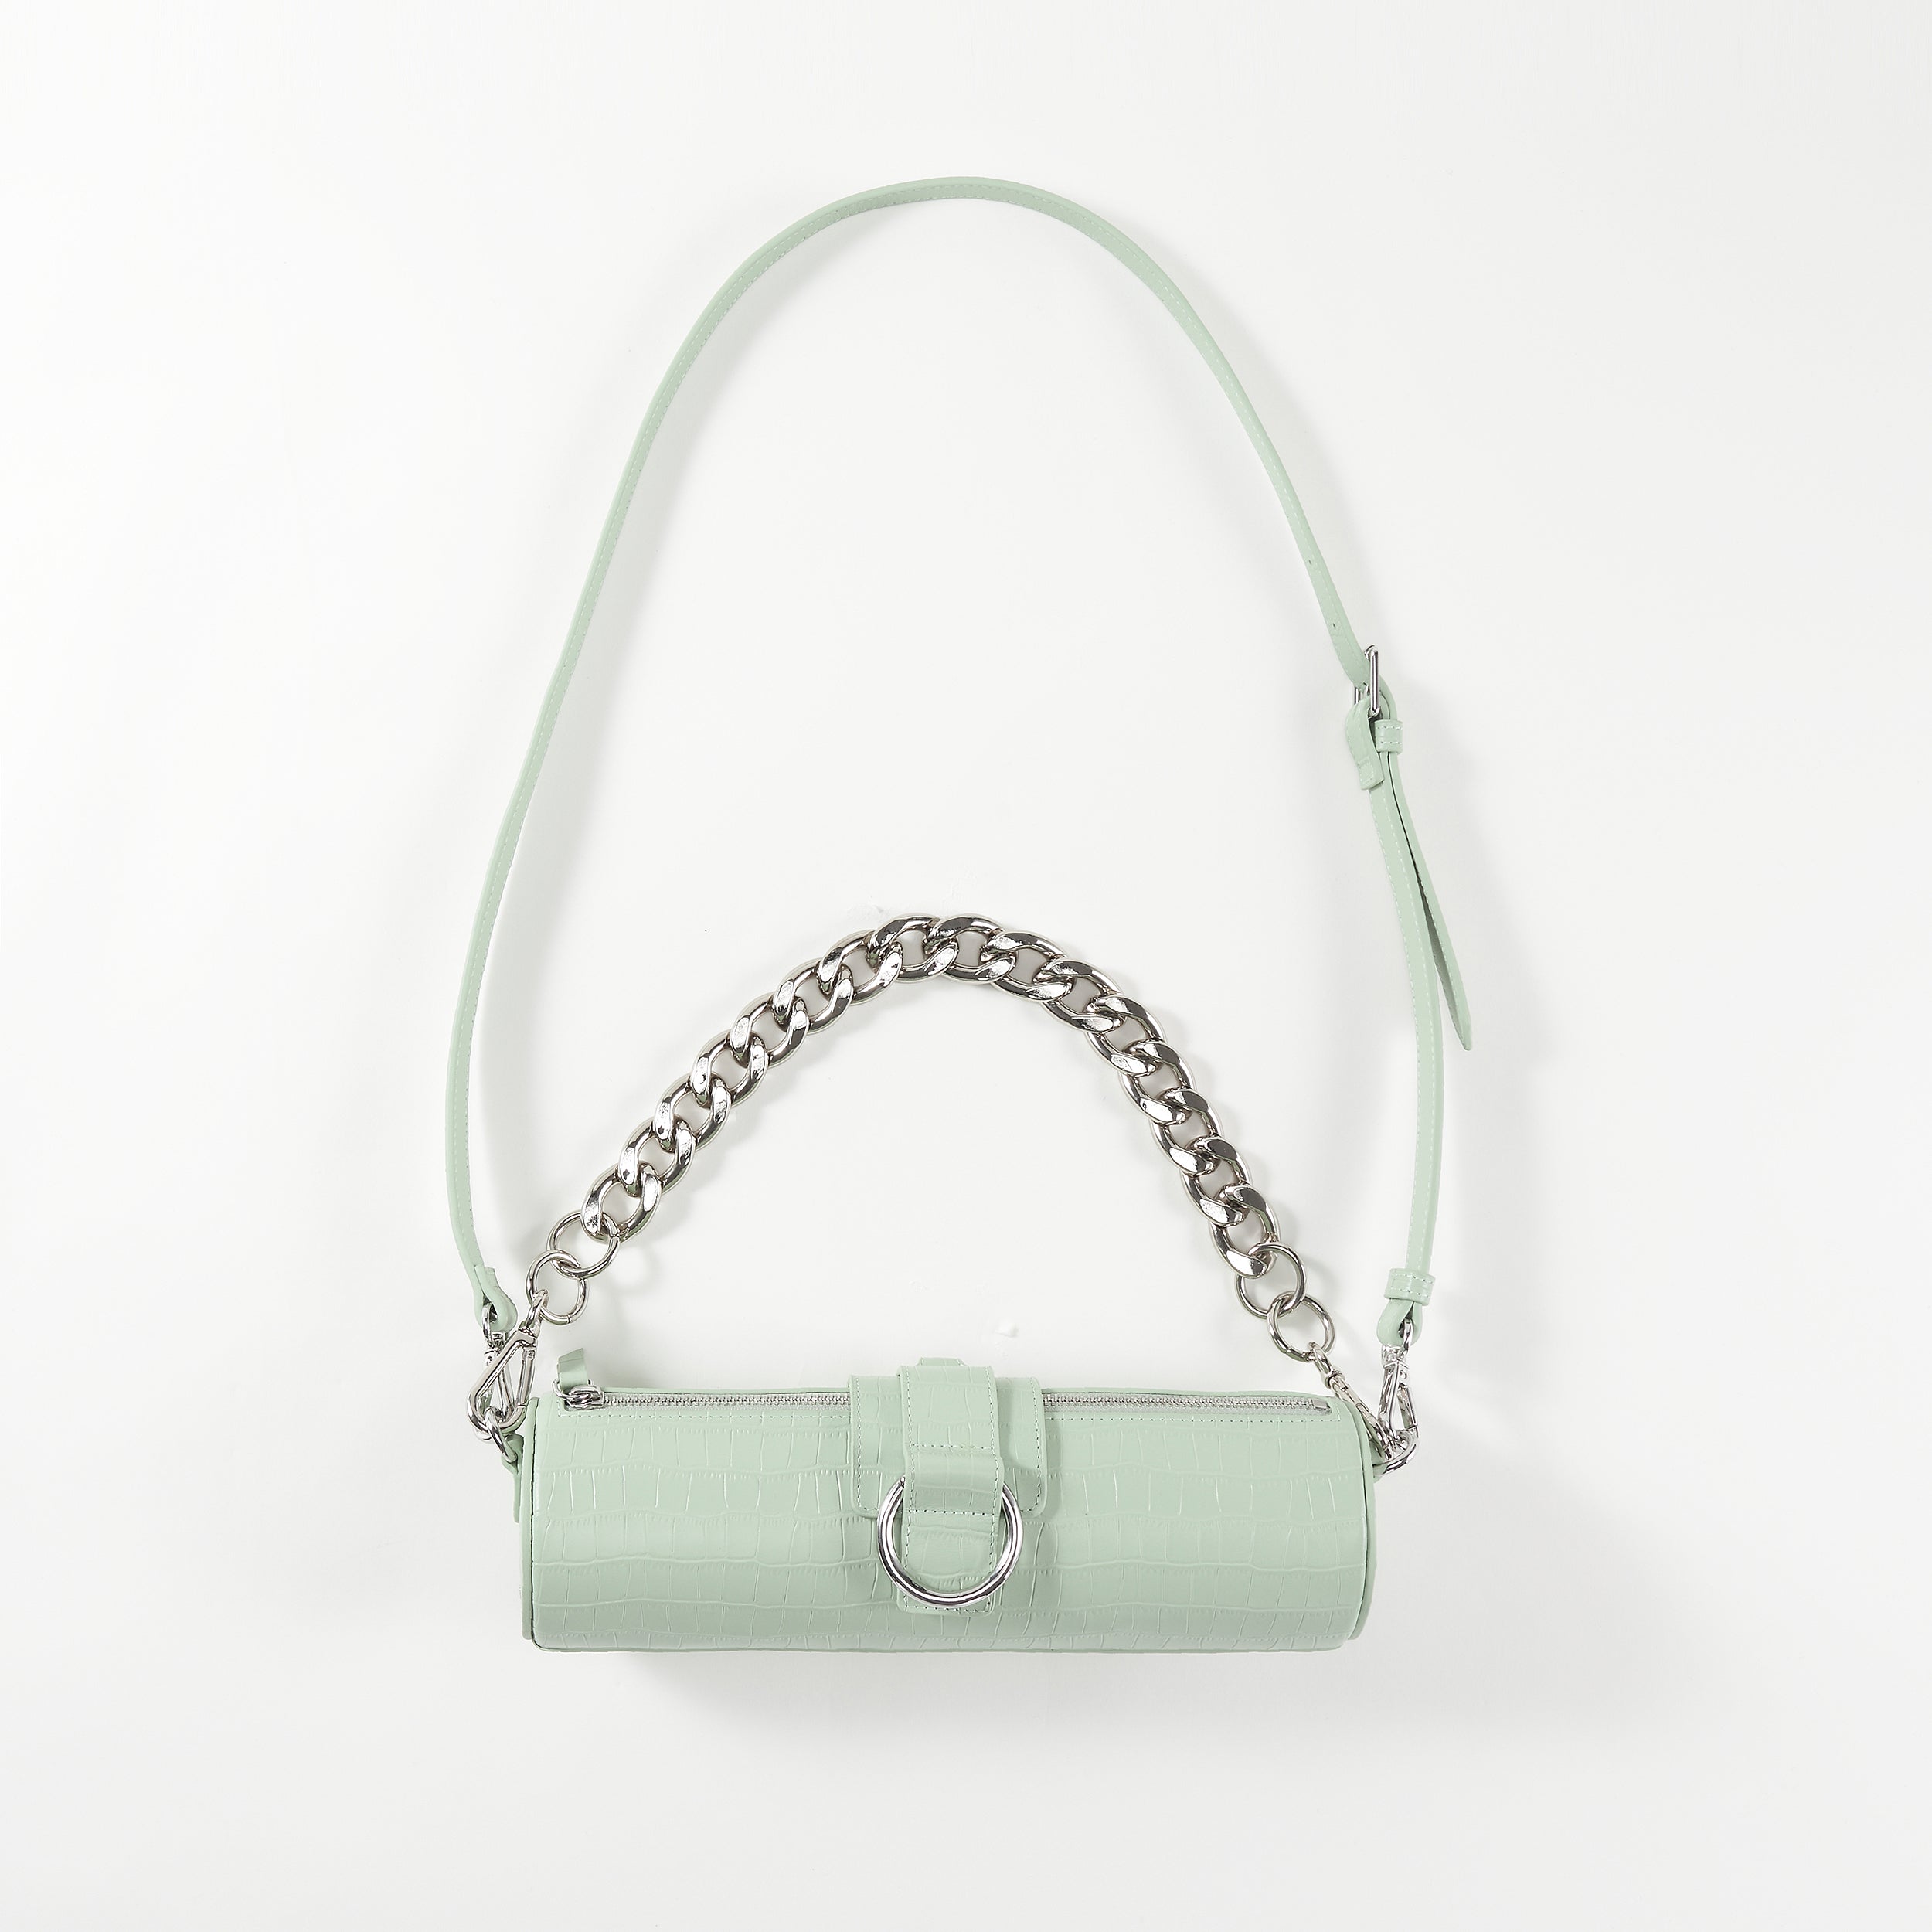 DailyObjects Mint Green Scout Crossbody Bag Buy At DailyObjects